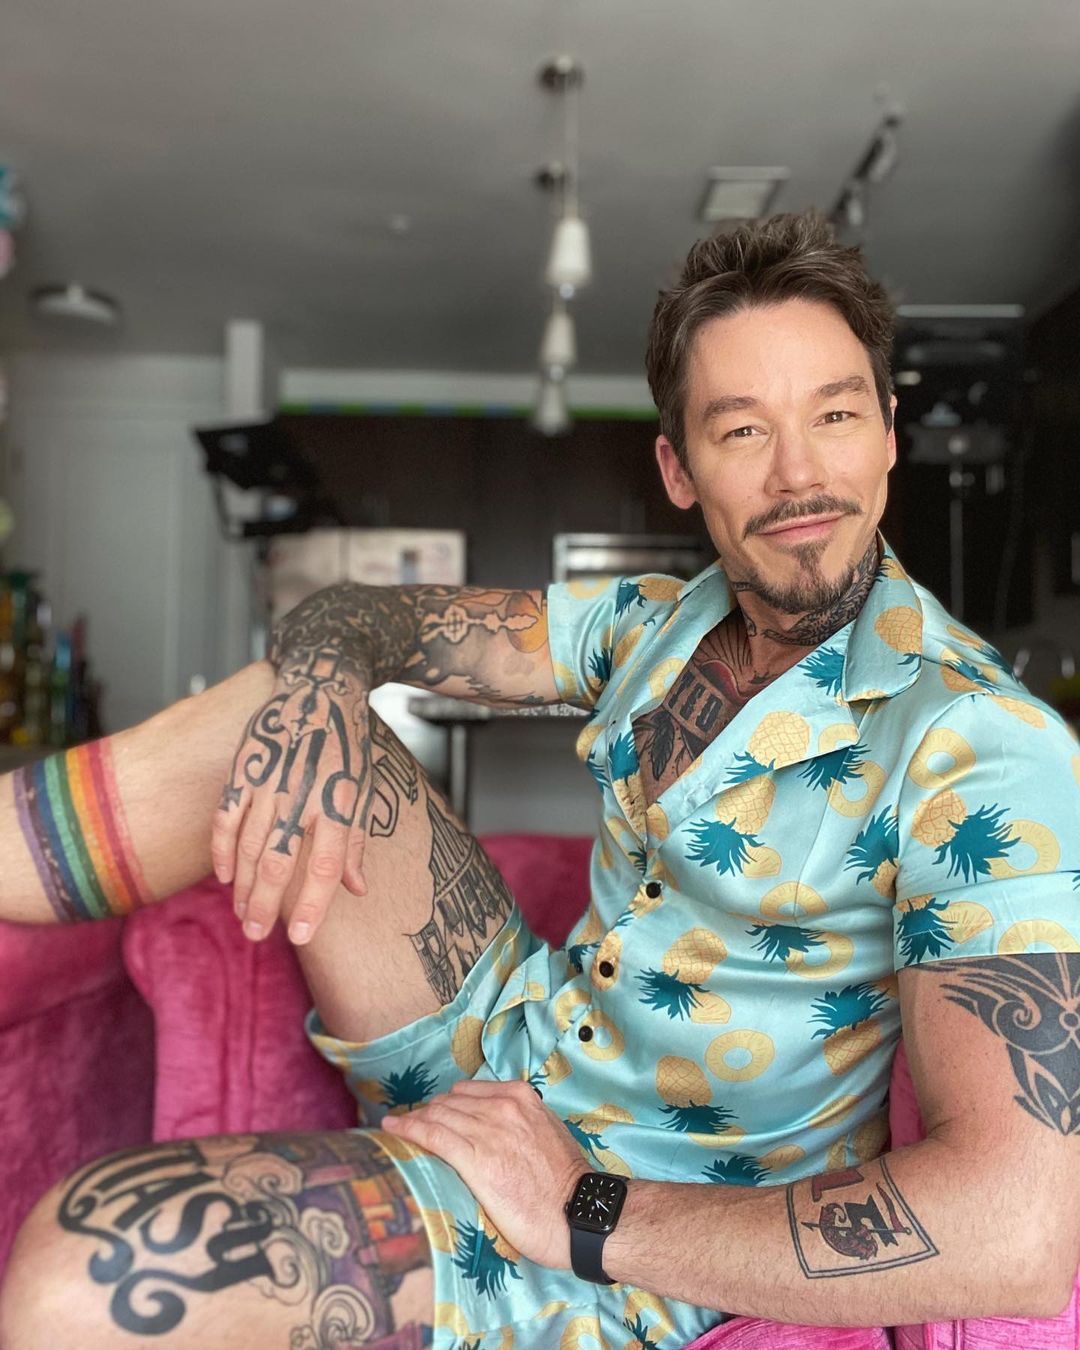 Where Does Hgtvs David Bromstad Live Photos Of Florida Home03 ?fit=1080%2C1350